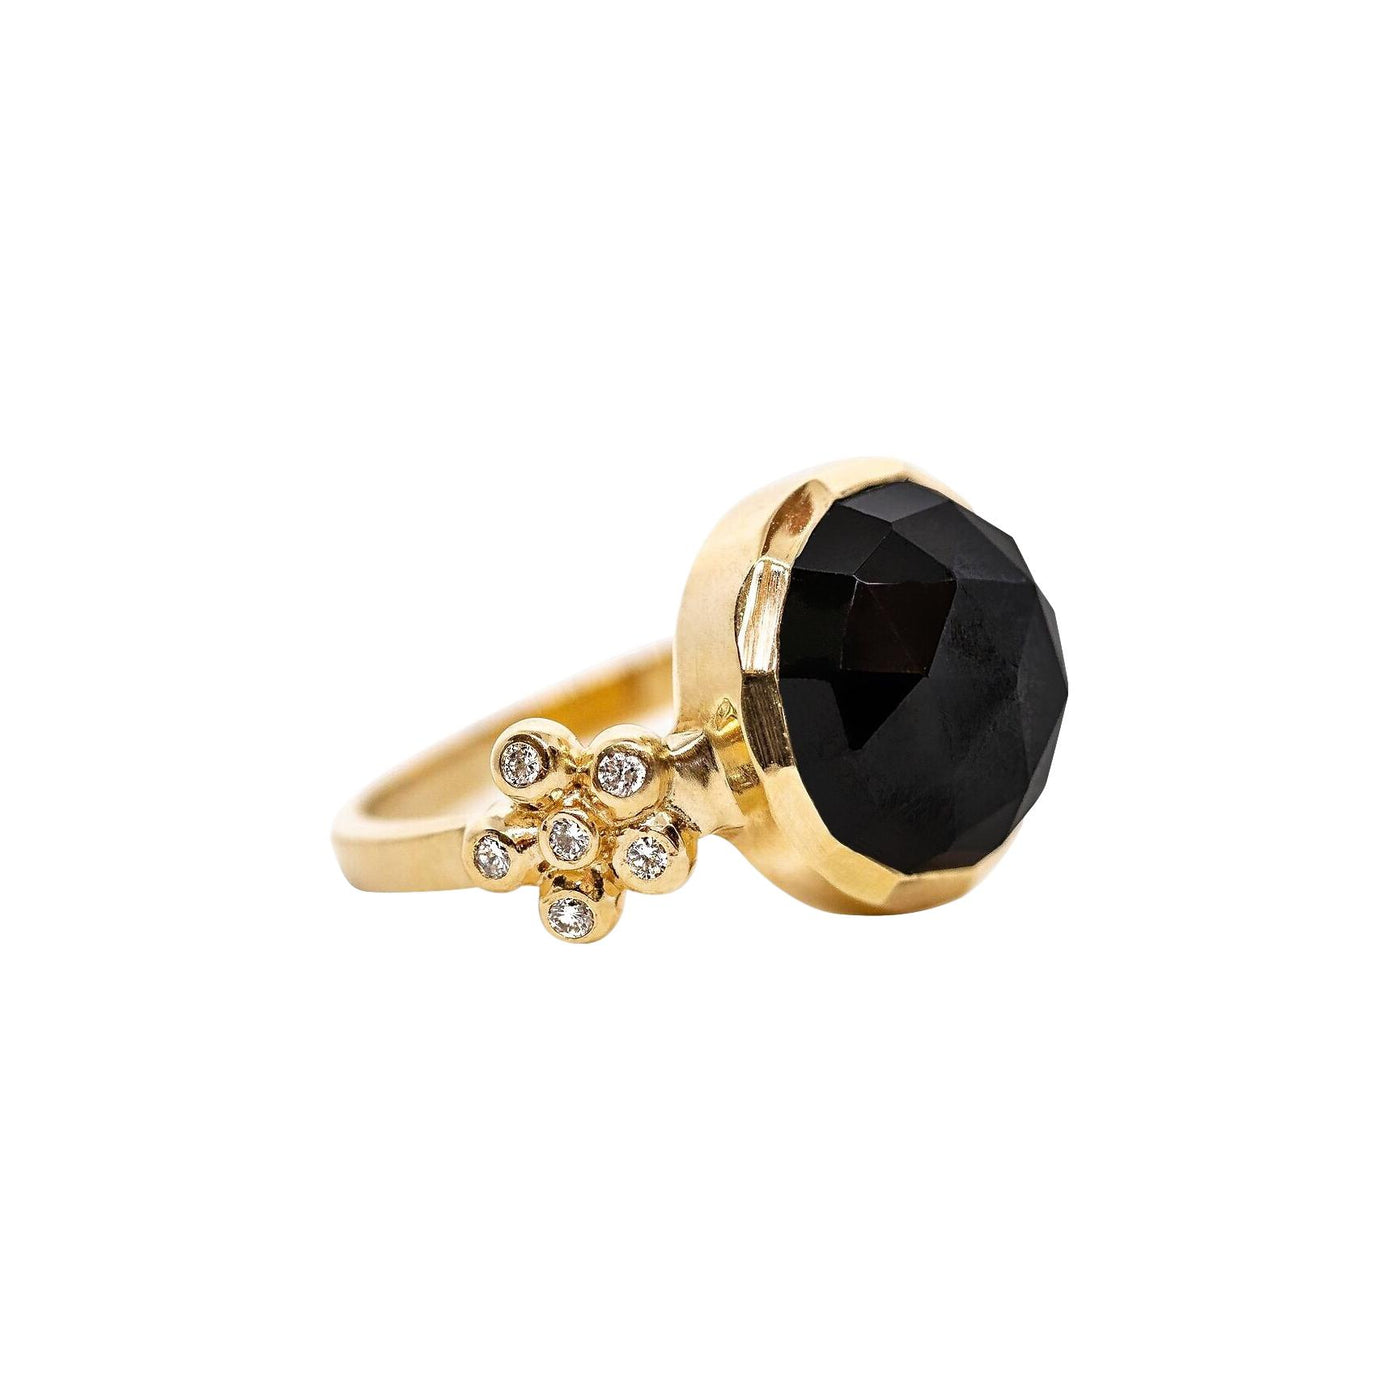 Gerber Ring with Black Spinel - Lauren Sigman Collection